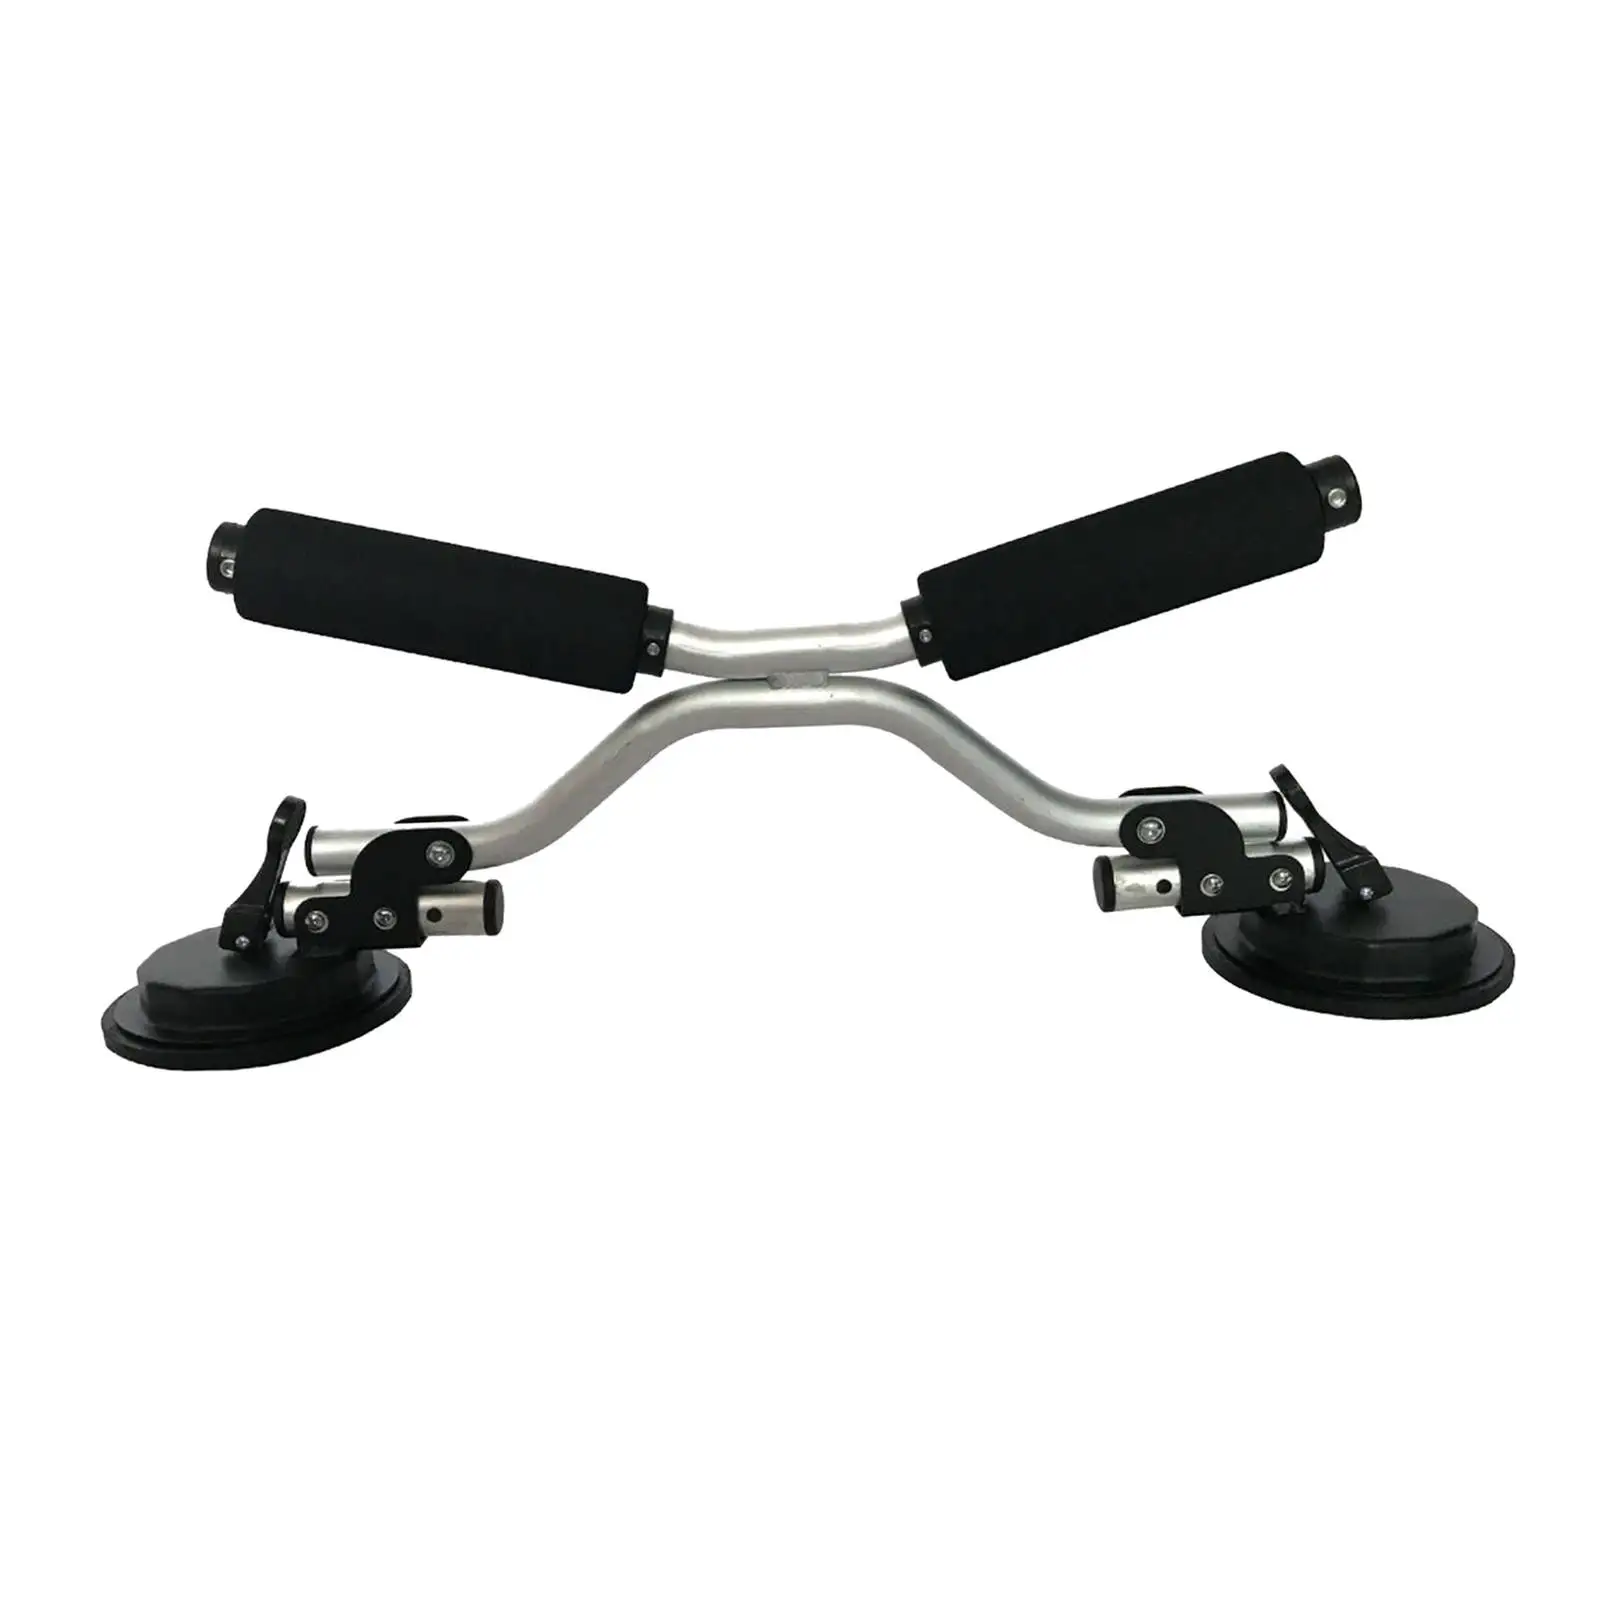 Boat Roller Help YOU to Load The Boat to Car Top Easily with Heavy-Duty Suction Cups Aluminum Canoes Roller Load Assist